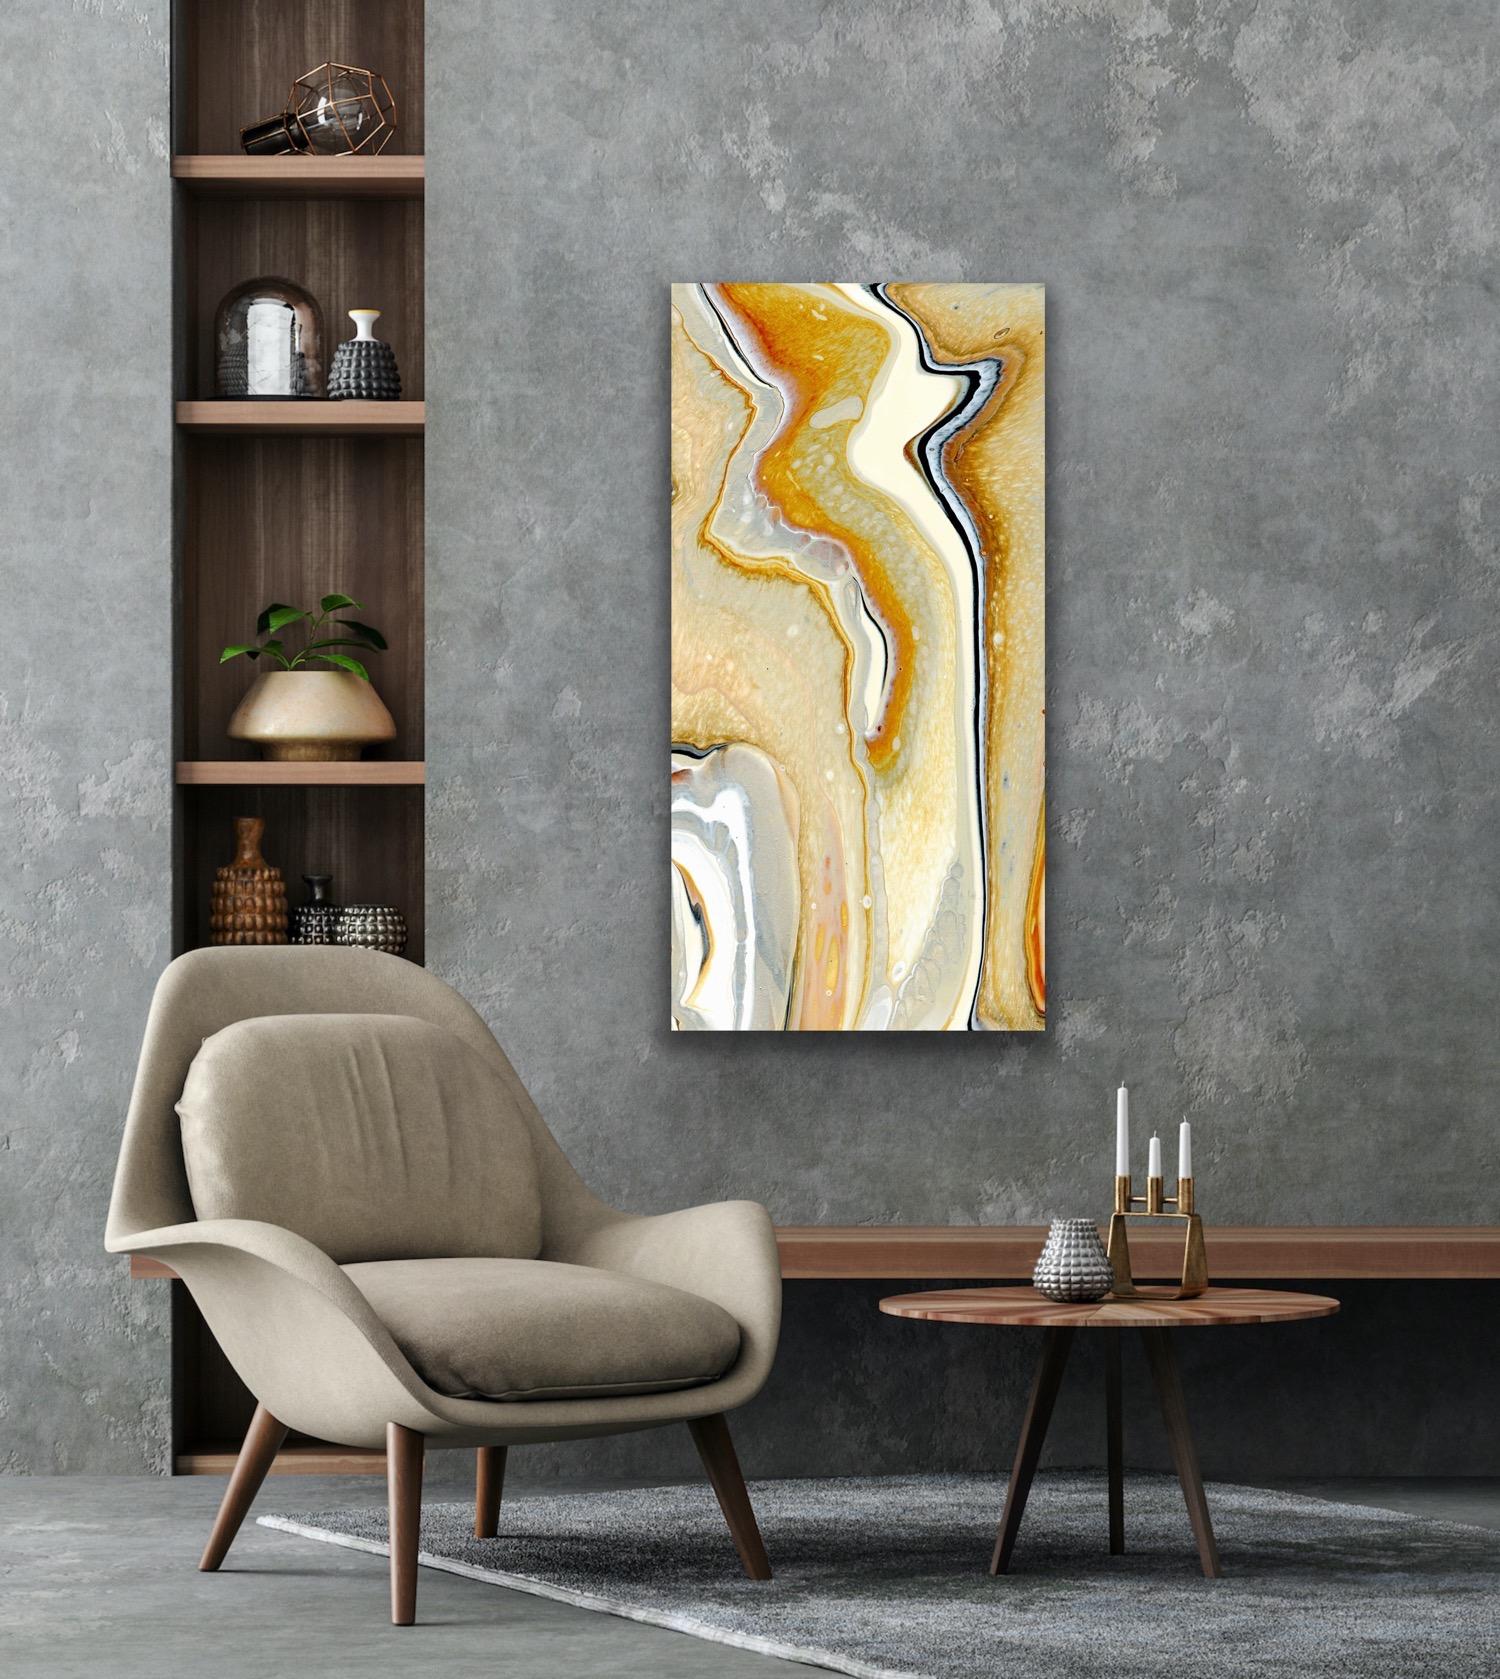 Modern Abstract Painting, Geode Inspired Art, Giclee Print, Signed by Artist - Beige Abstract Print by Celeste Reiter